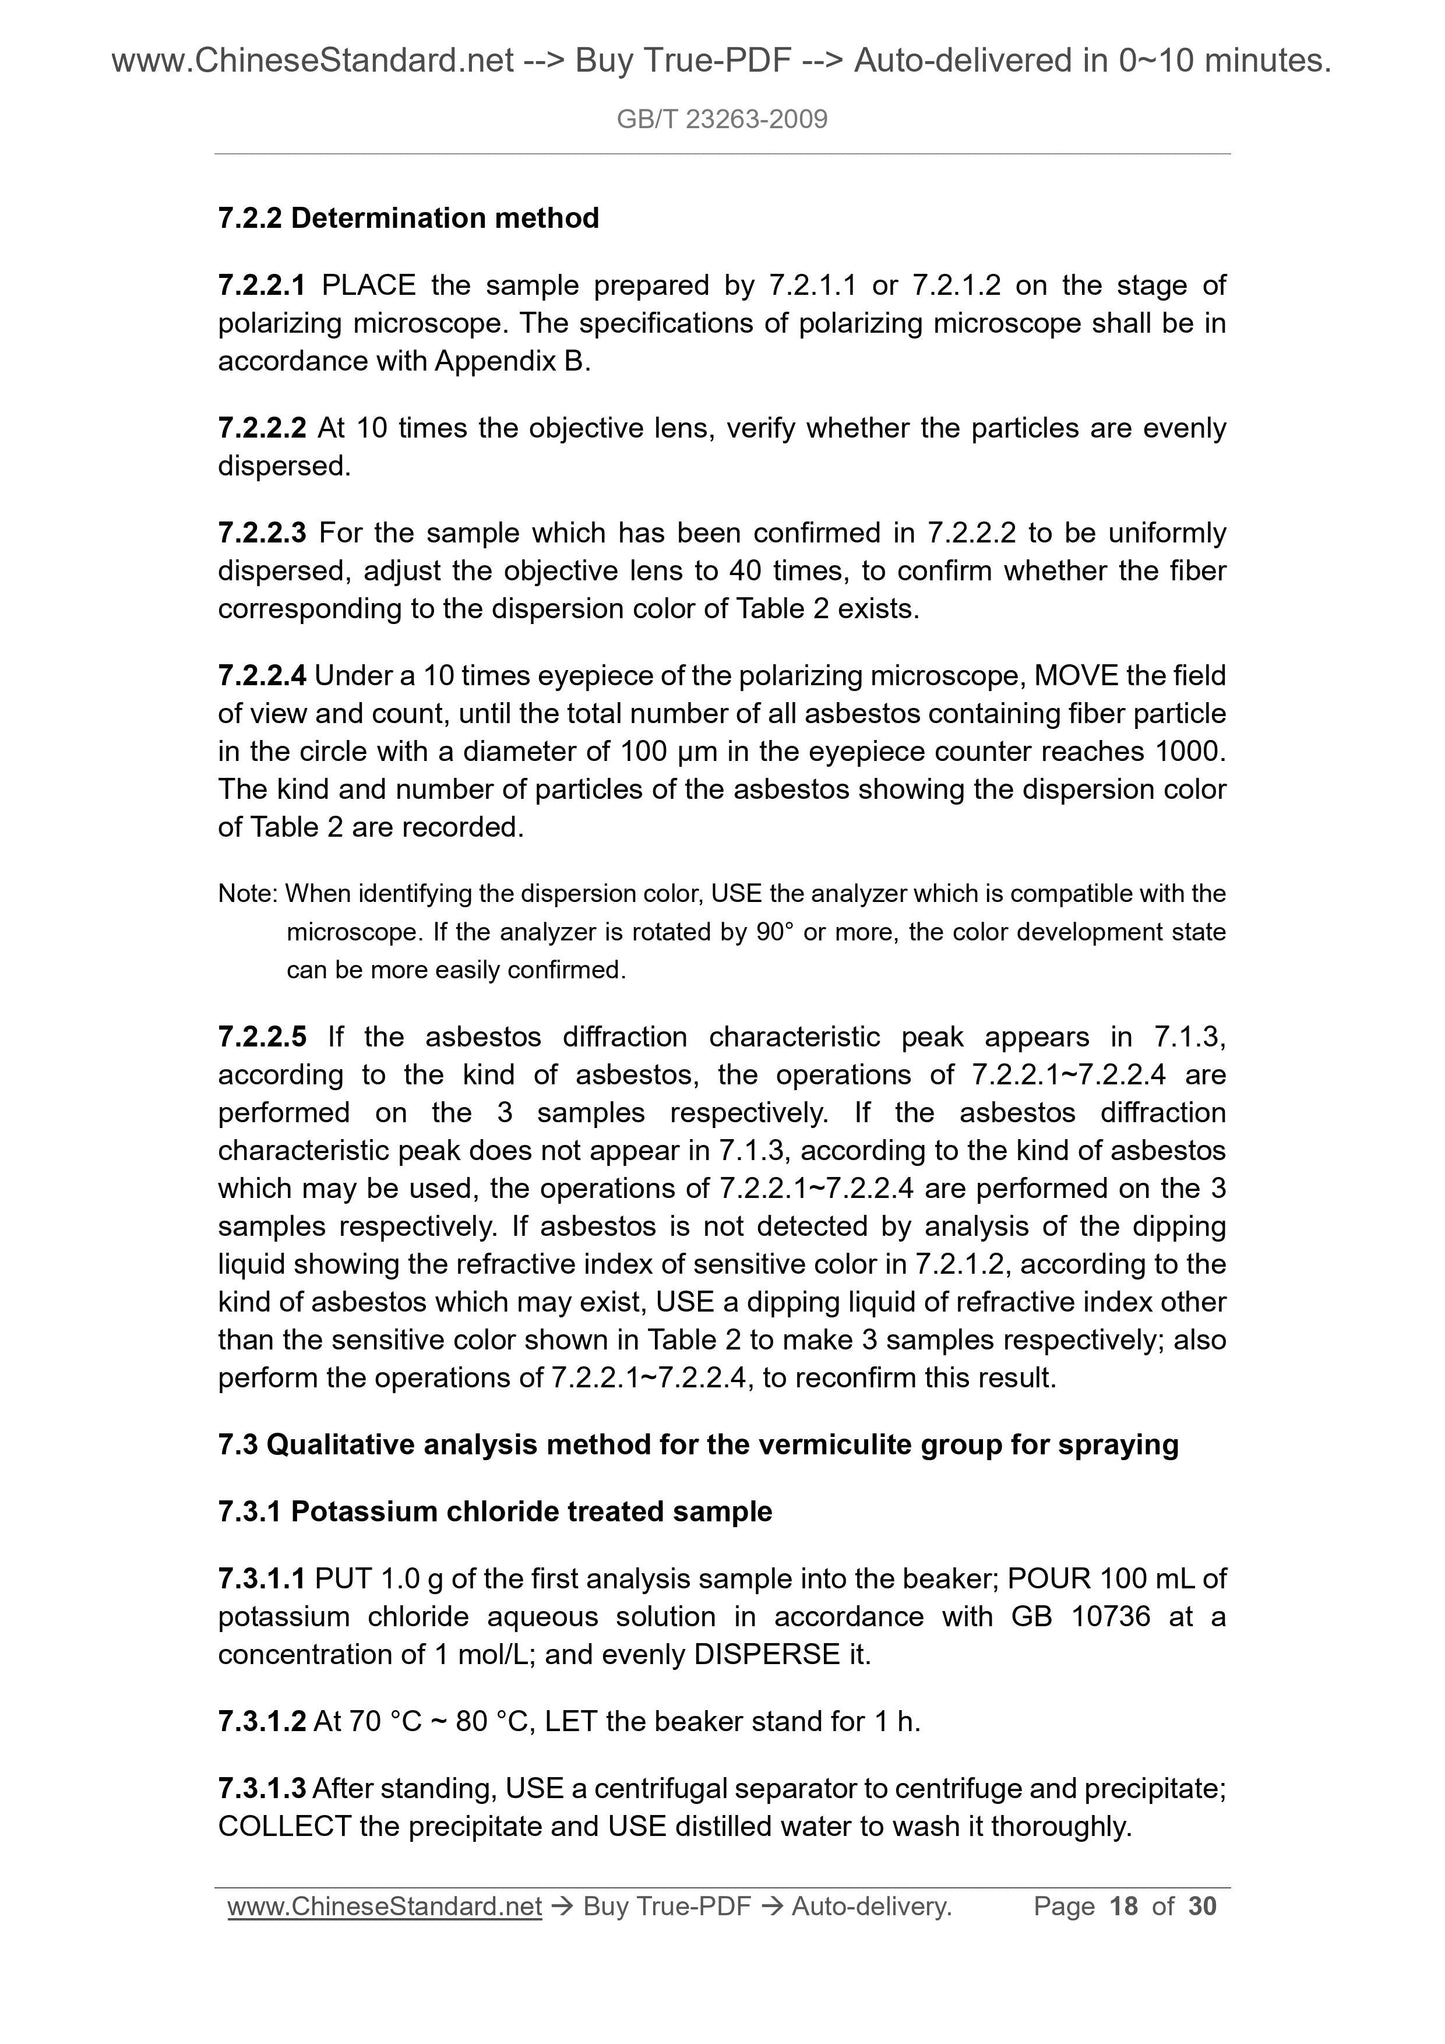 GB/T 23263-2009 Page 6